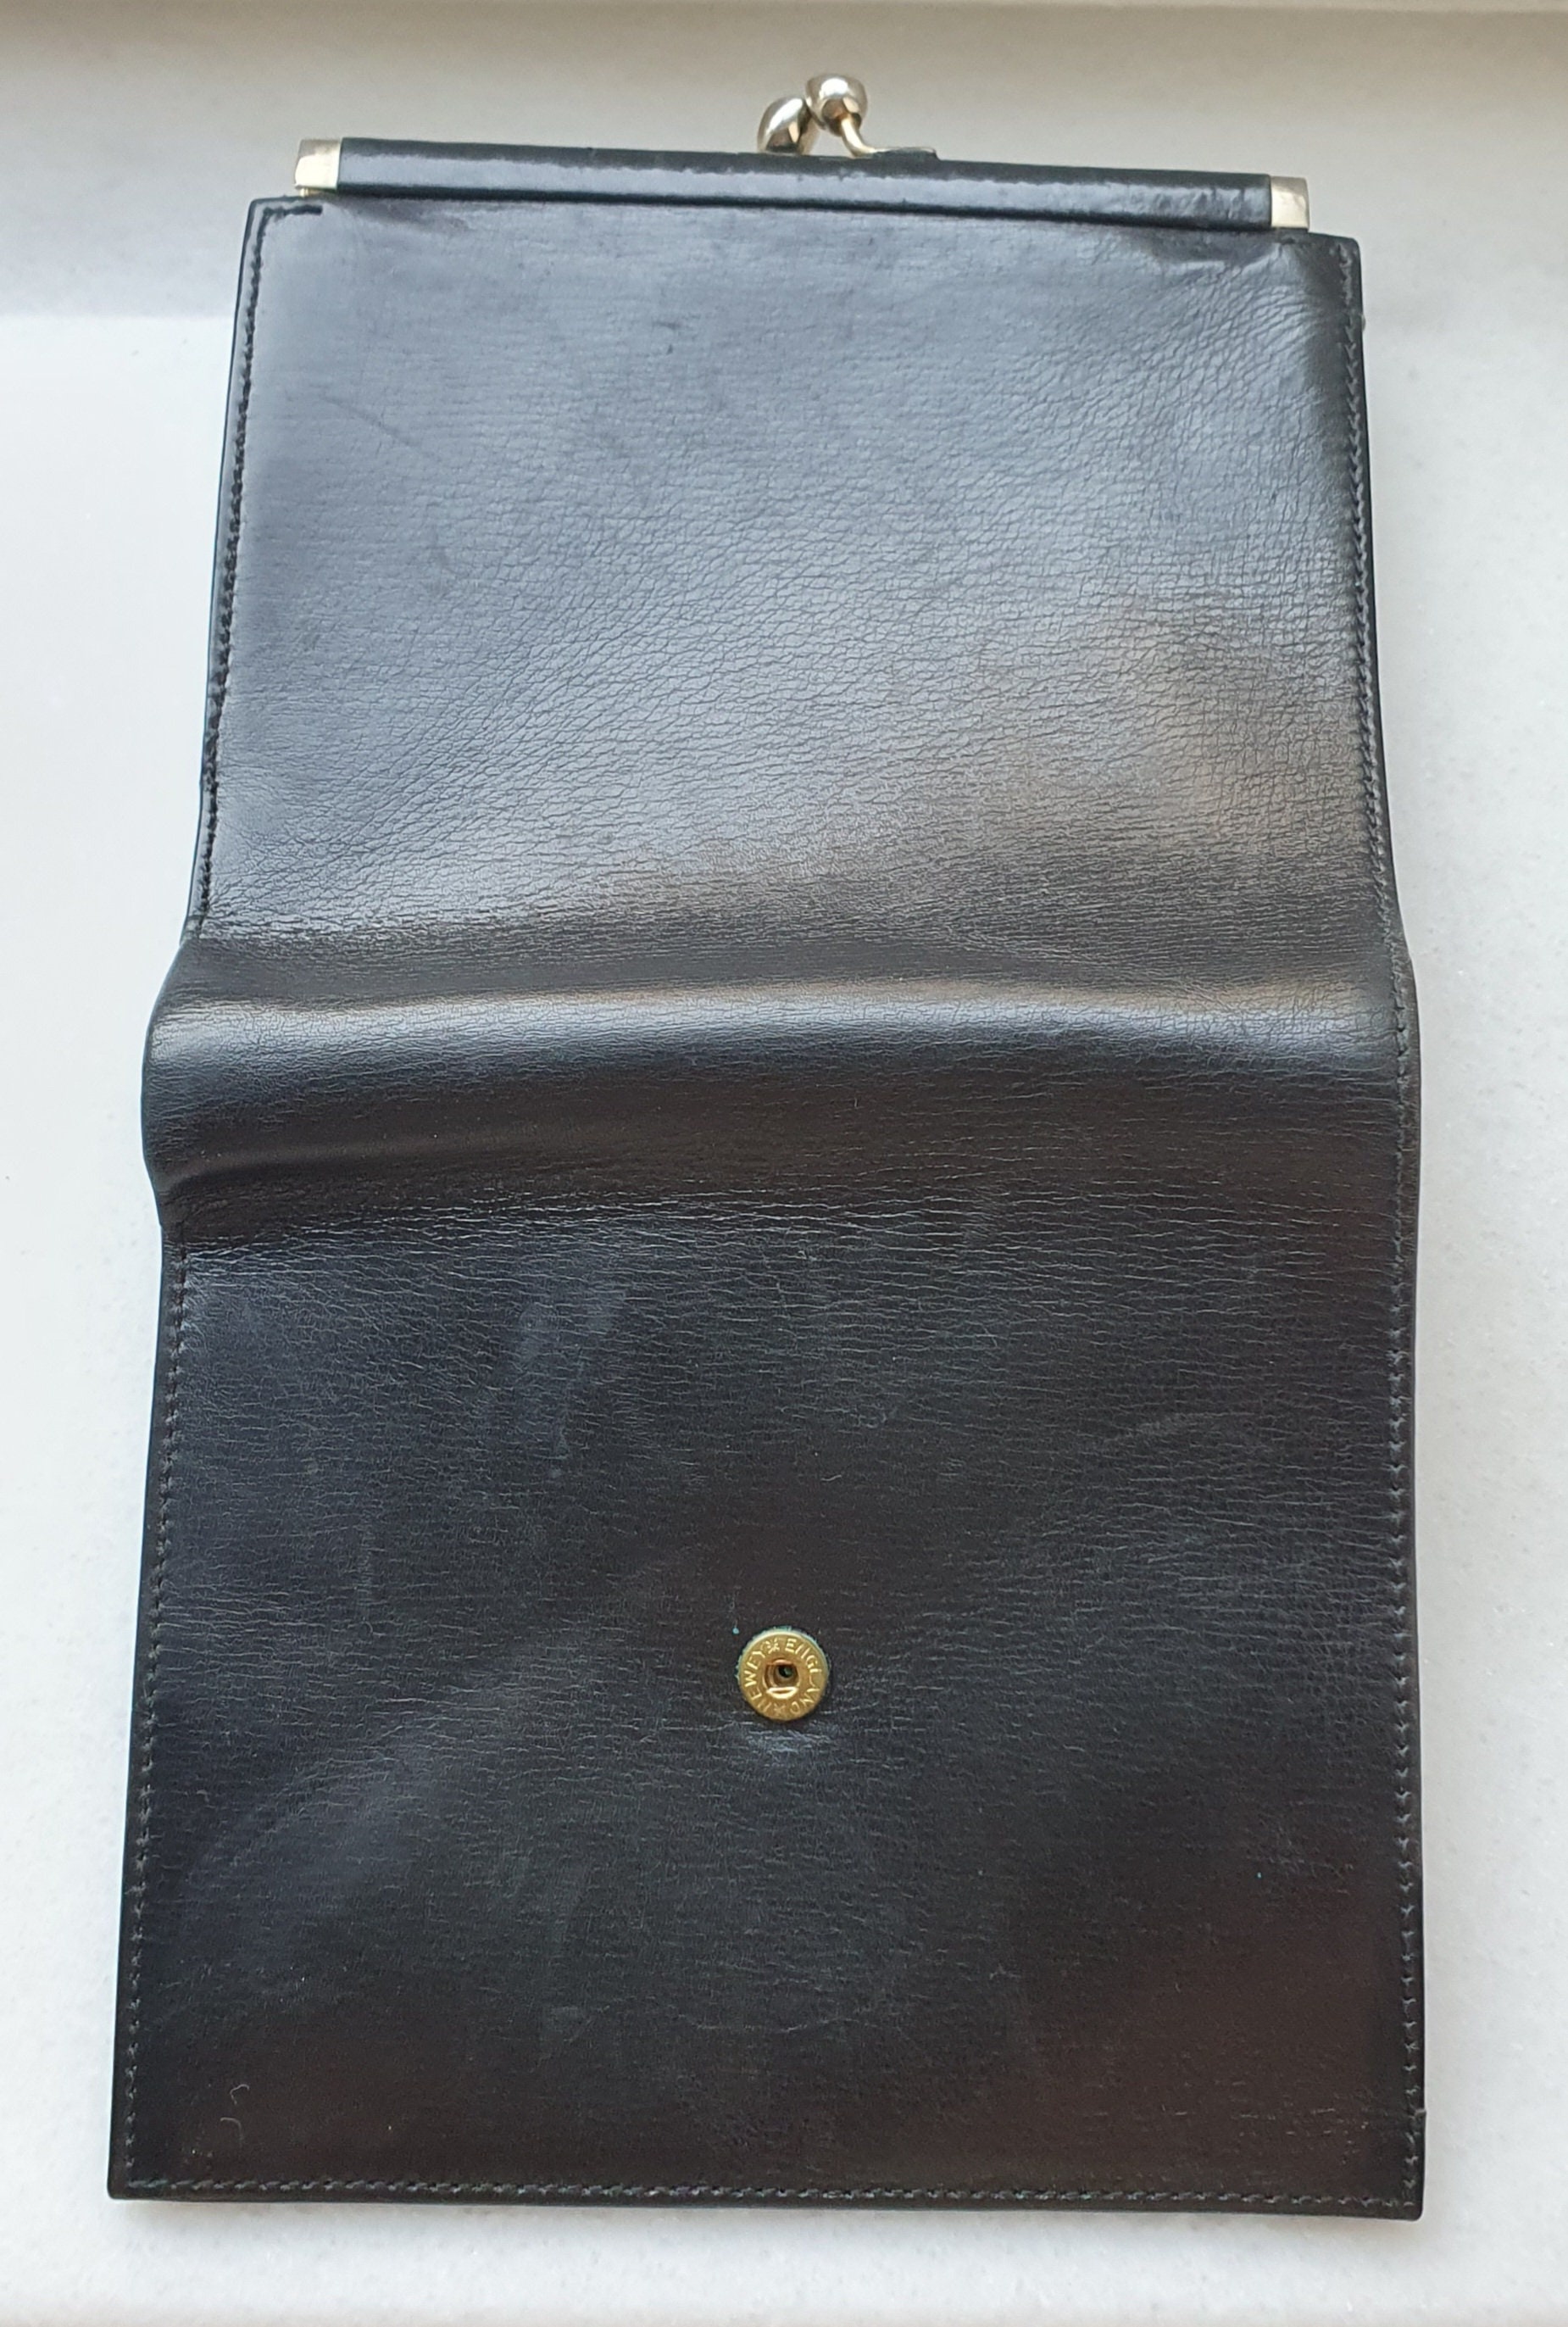 Gucci - Authenticated Wallet - Leather Black for Women, Never Worn